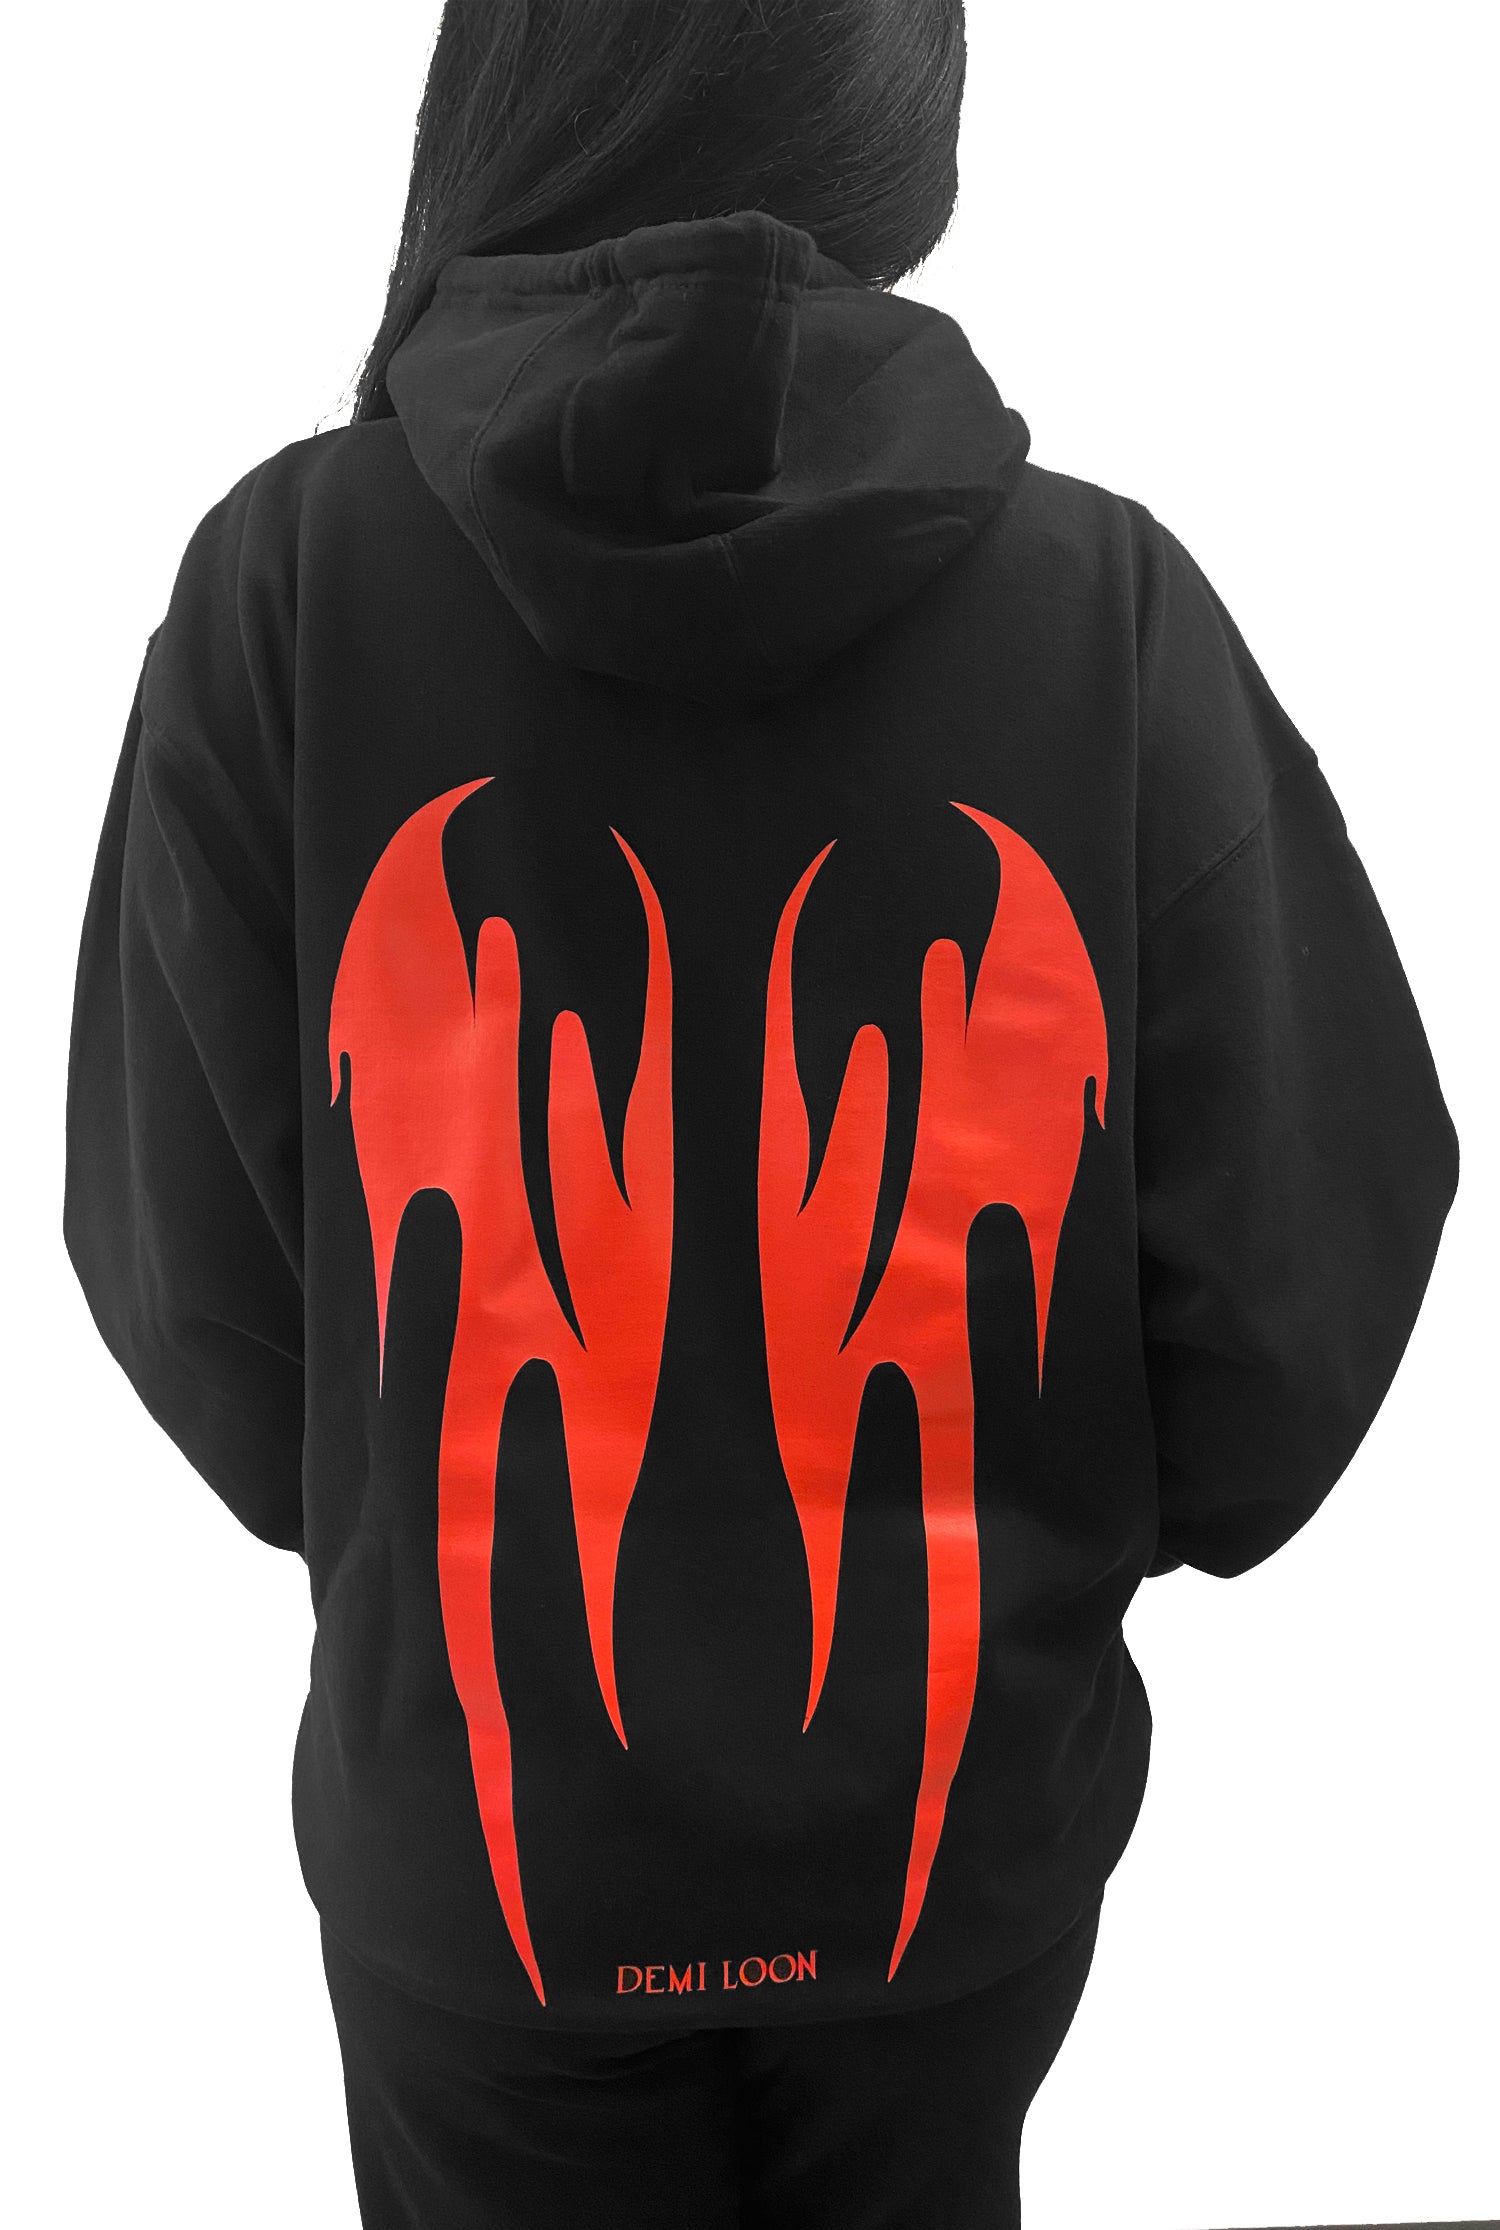 Hell Yeah Flame Graphic "Boyfriend Fit" Pullover Hoodie